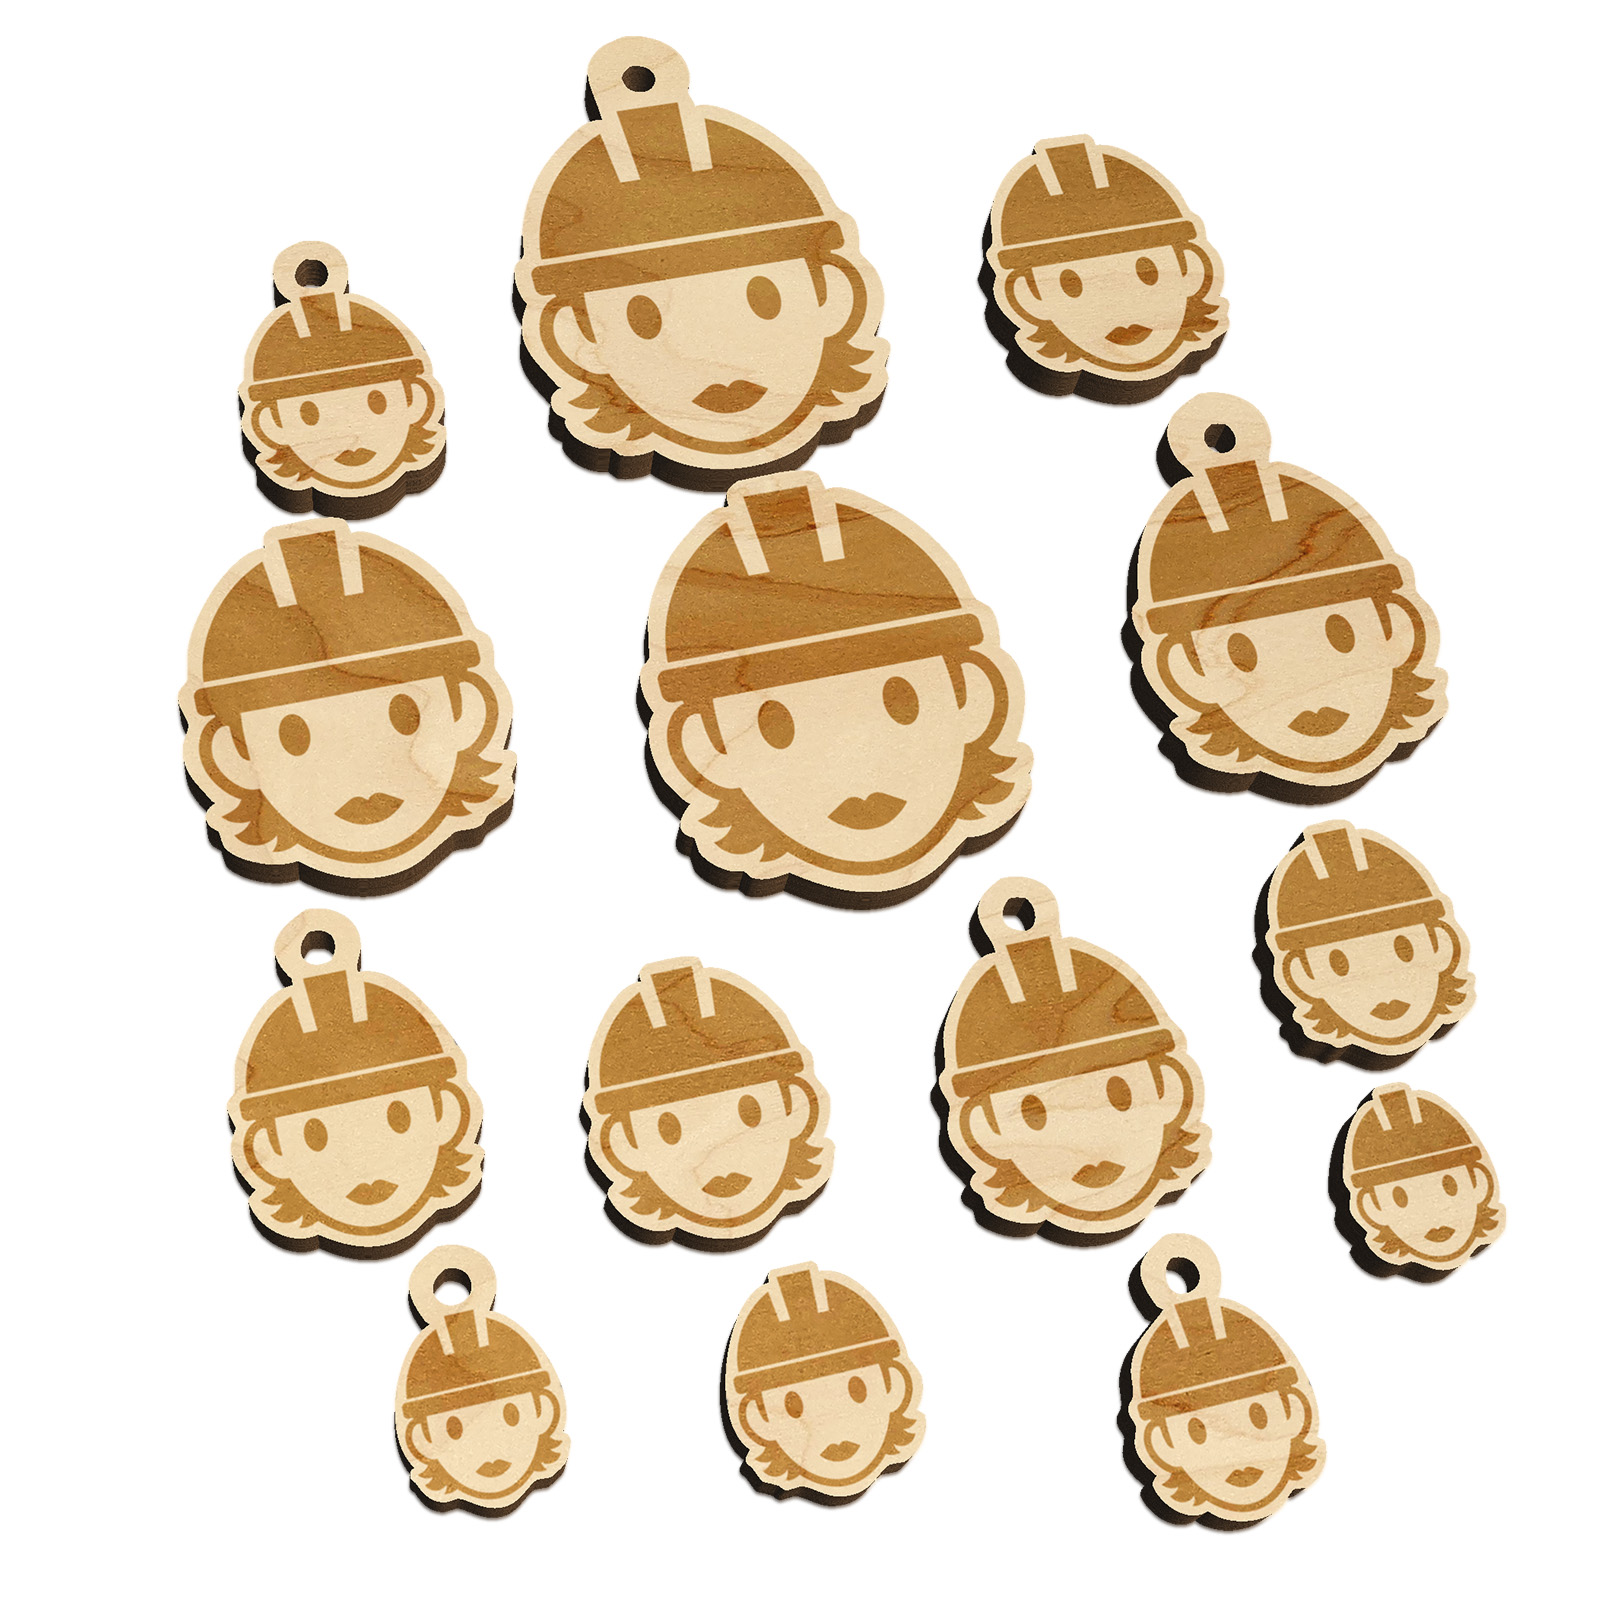 Occupation Construction Worker Builder Woman Icon Wood Mini Charms Shapes DIY Craft Jewelry - No Hole - Various Sizes (16pcs) - image 1 of 7